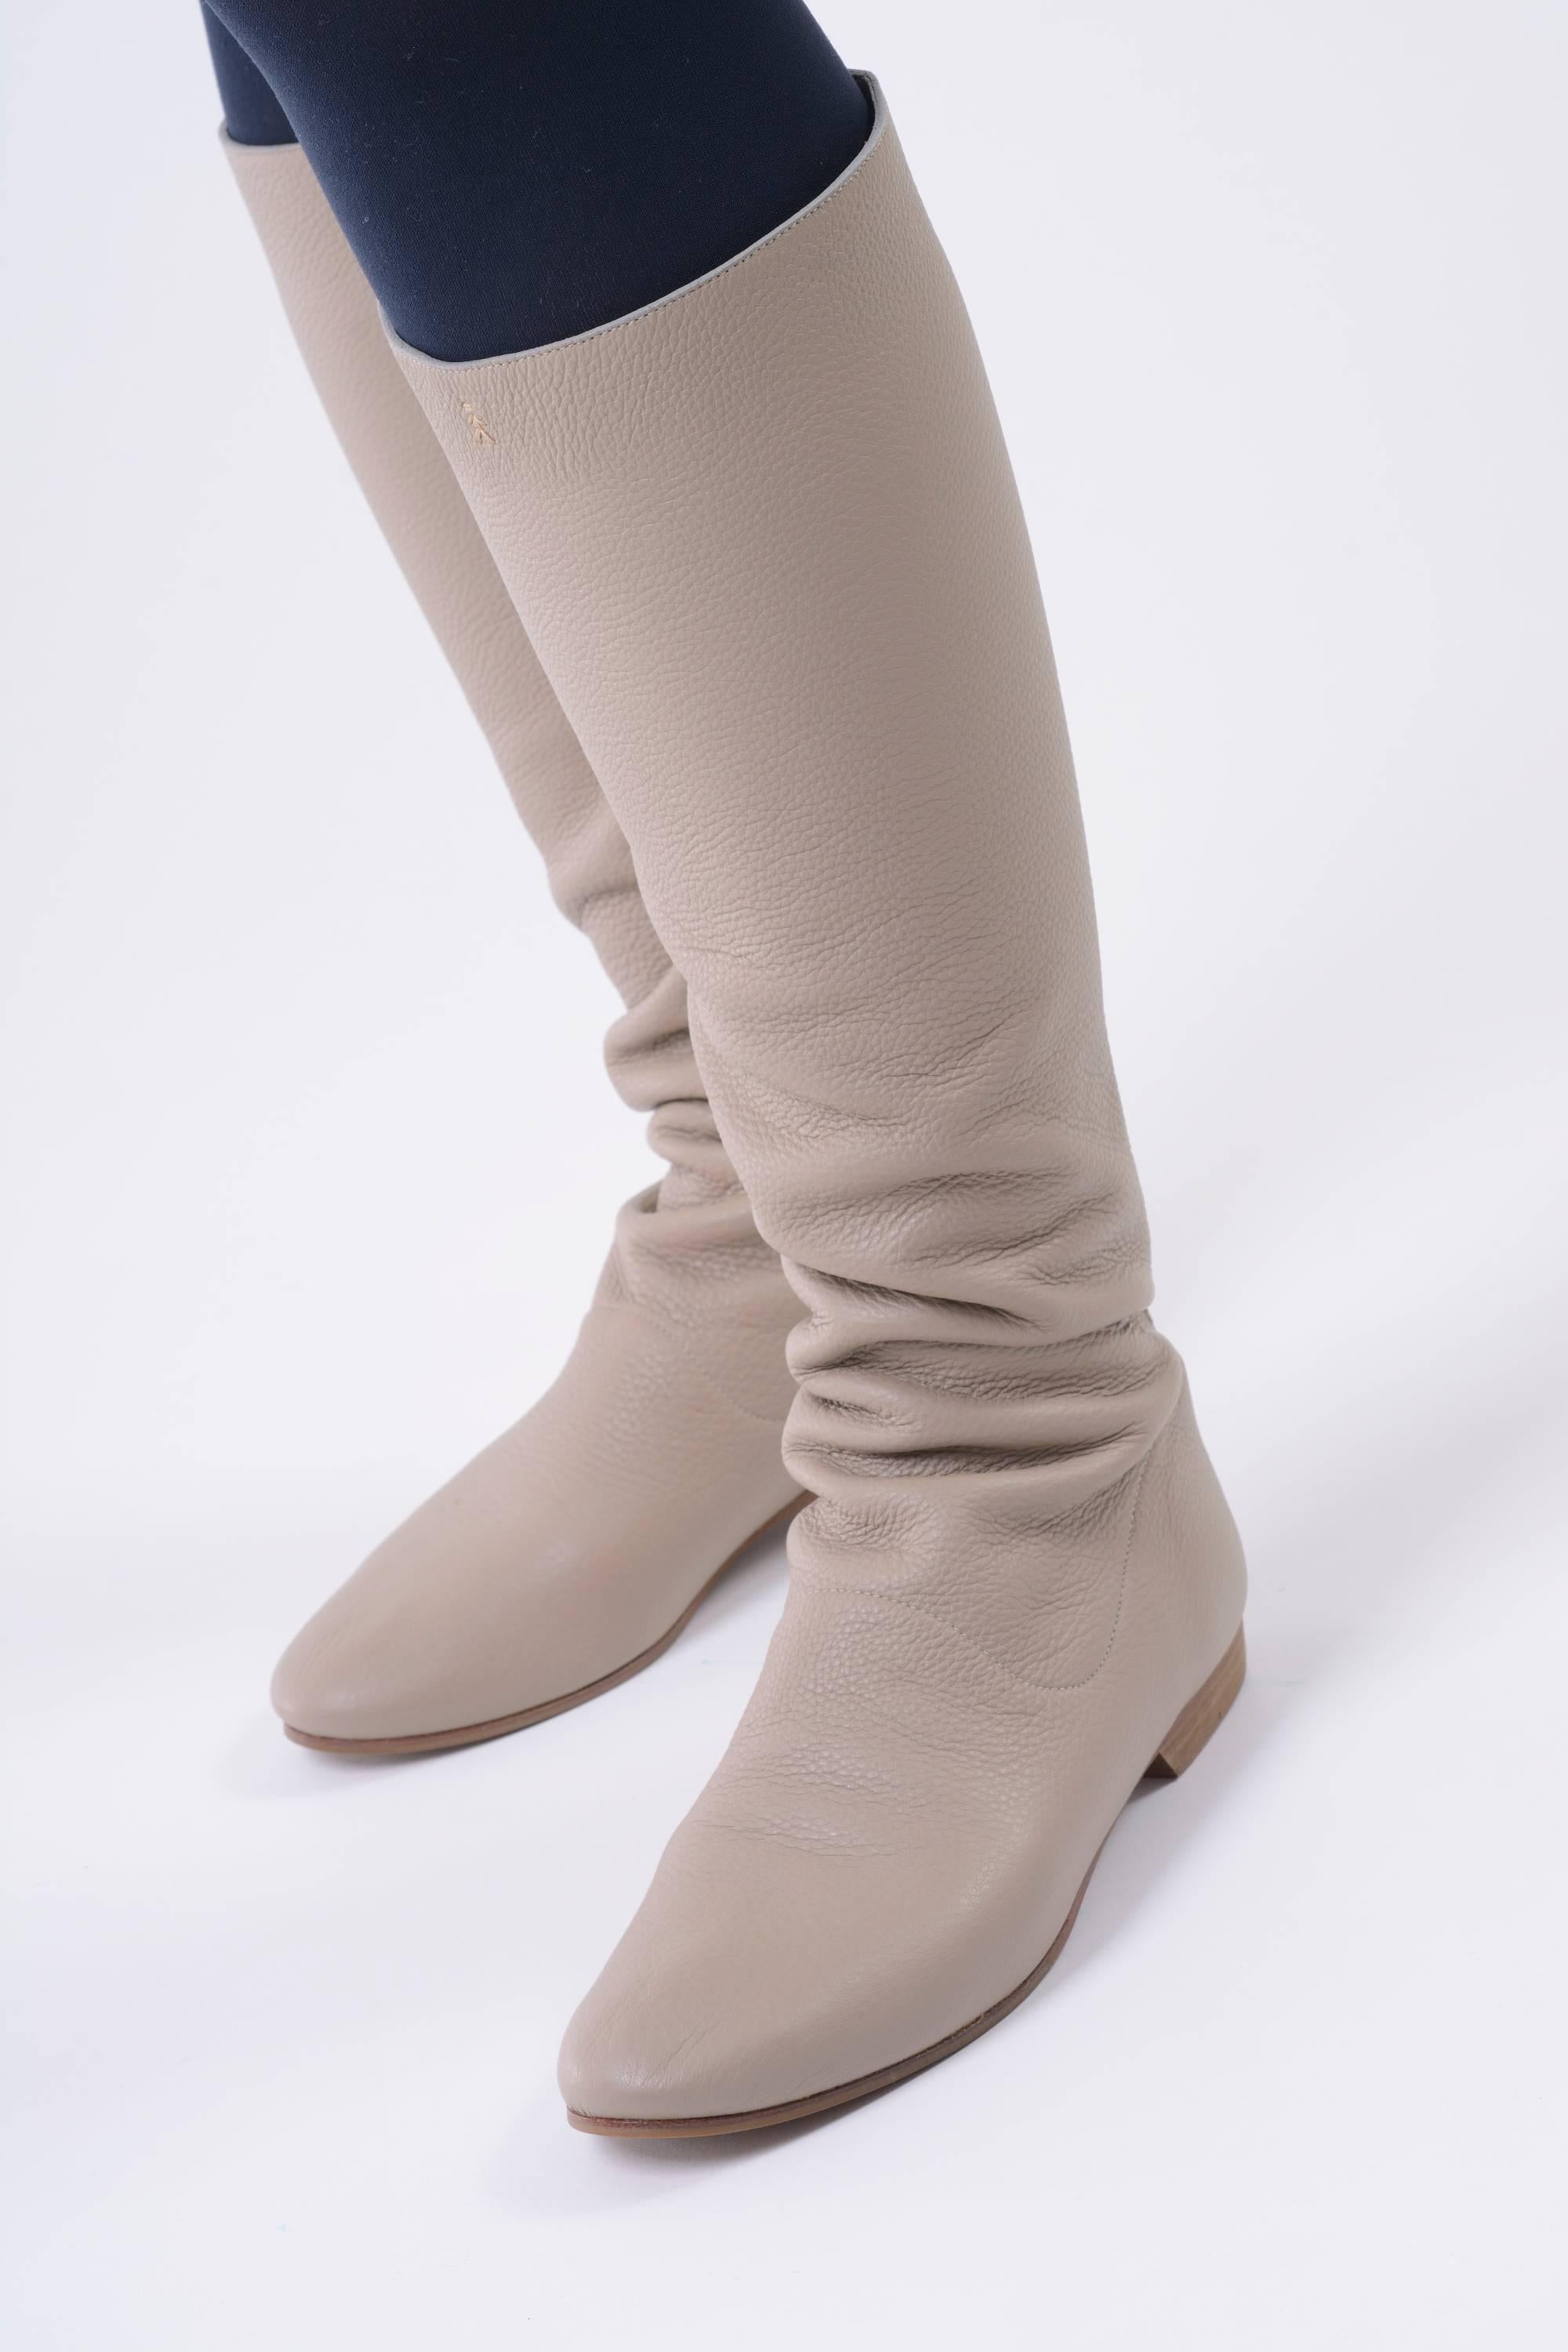 Henry Beguelin Beige Deer Leather Knee Slouch Boots  For Sale 2